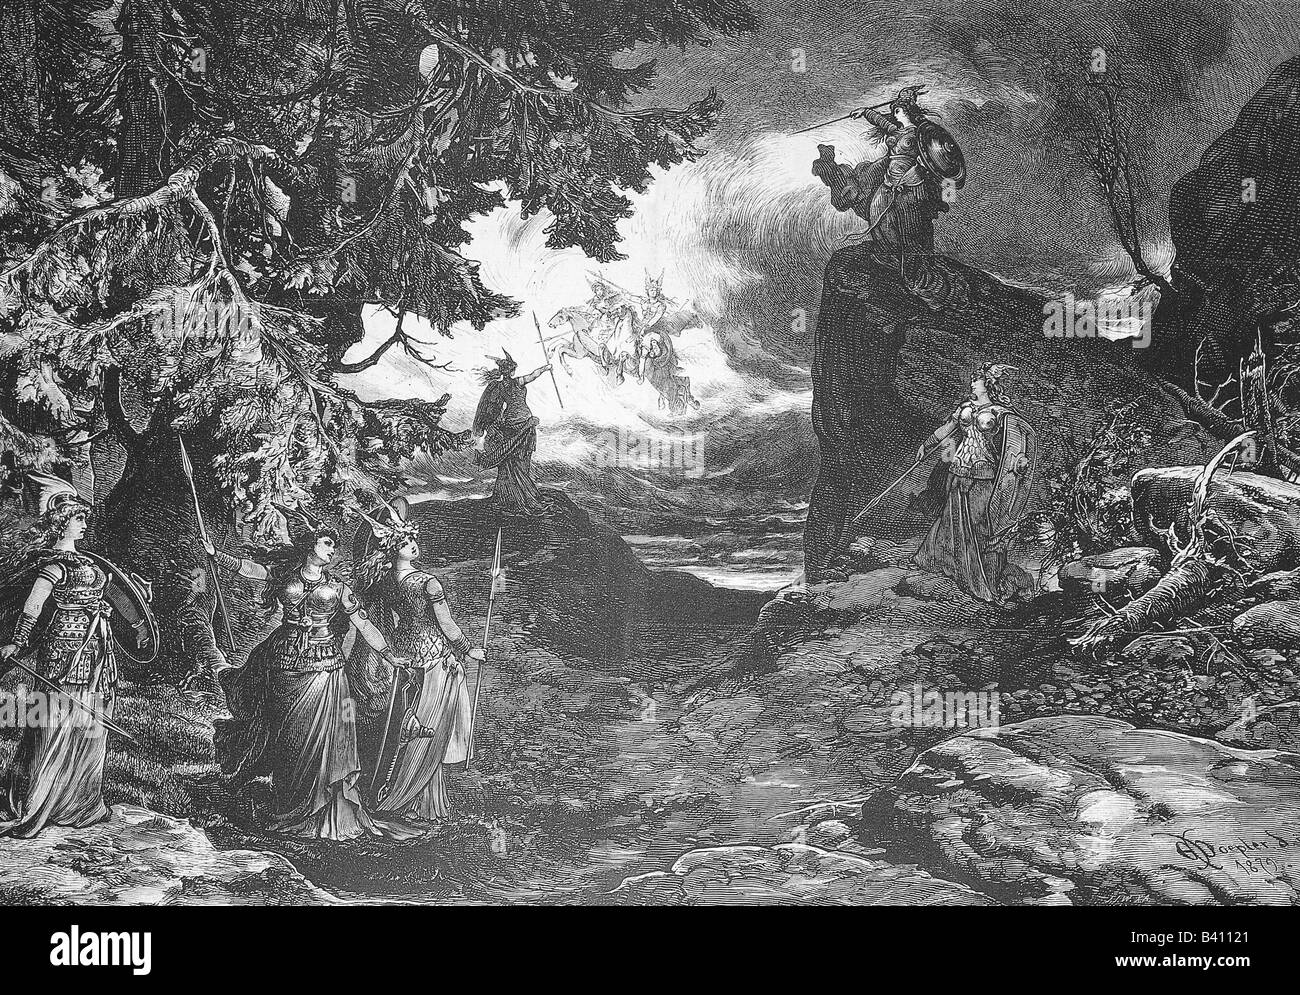 Wagner, Richard, 22.5.1813 - 13.2.1883, German composer, work, opera 'Valkyrie', from 'The Ring of the Nibelung' (Der Ring des Nibelungen), scene: Ride of the Valkyries, wood engraving after drawing by E. Doepler junior, 19th century, Stock Photo